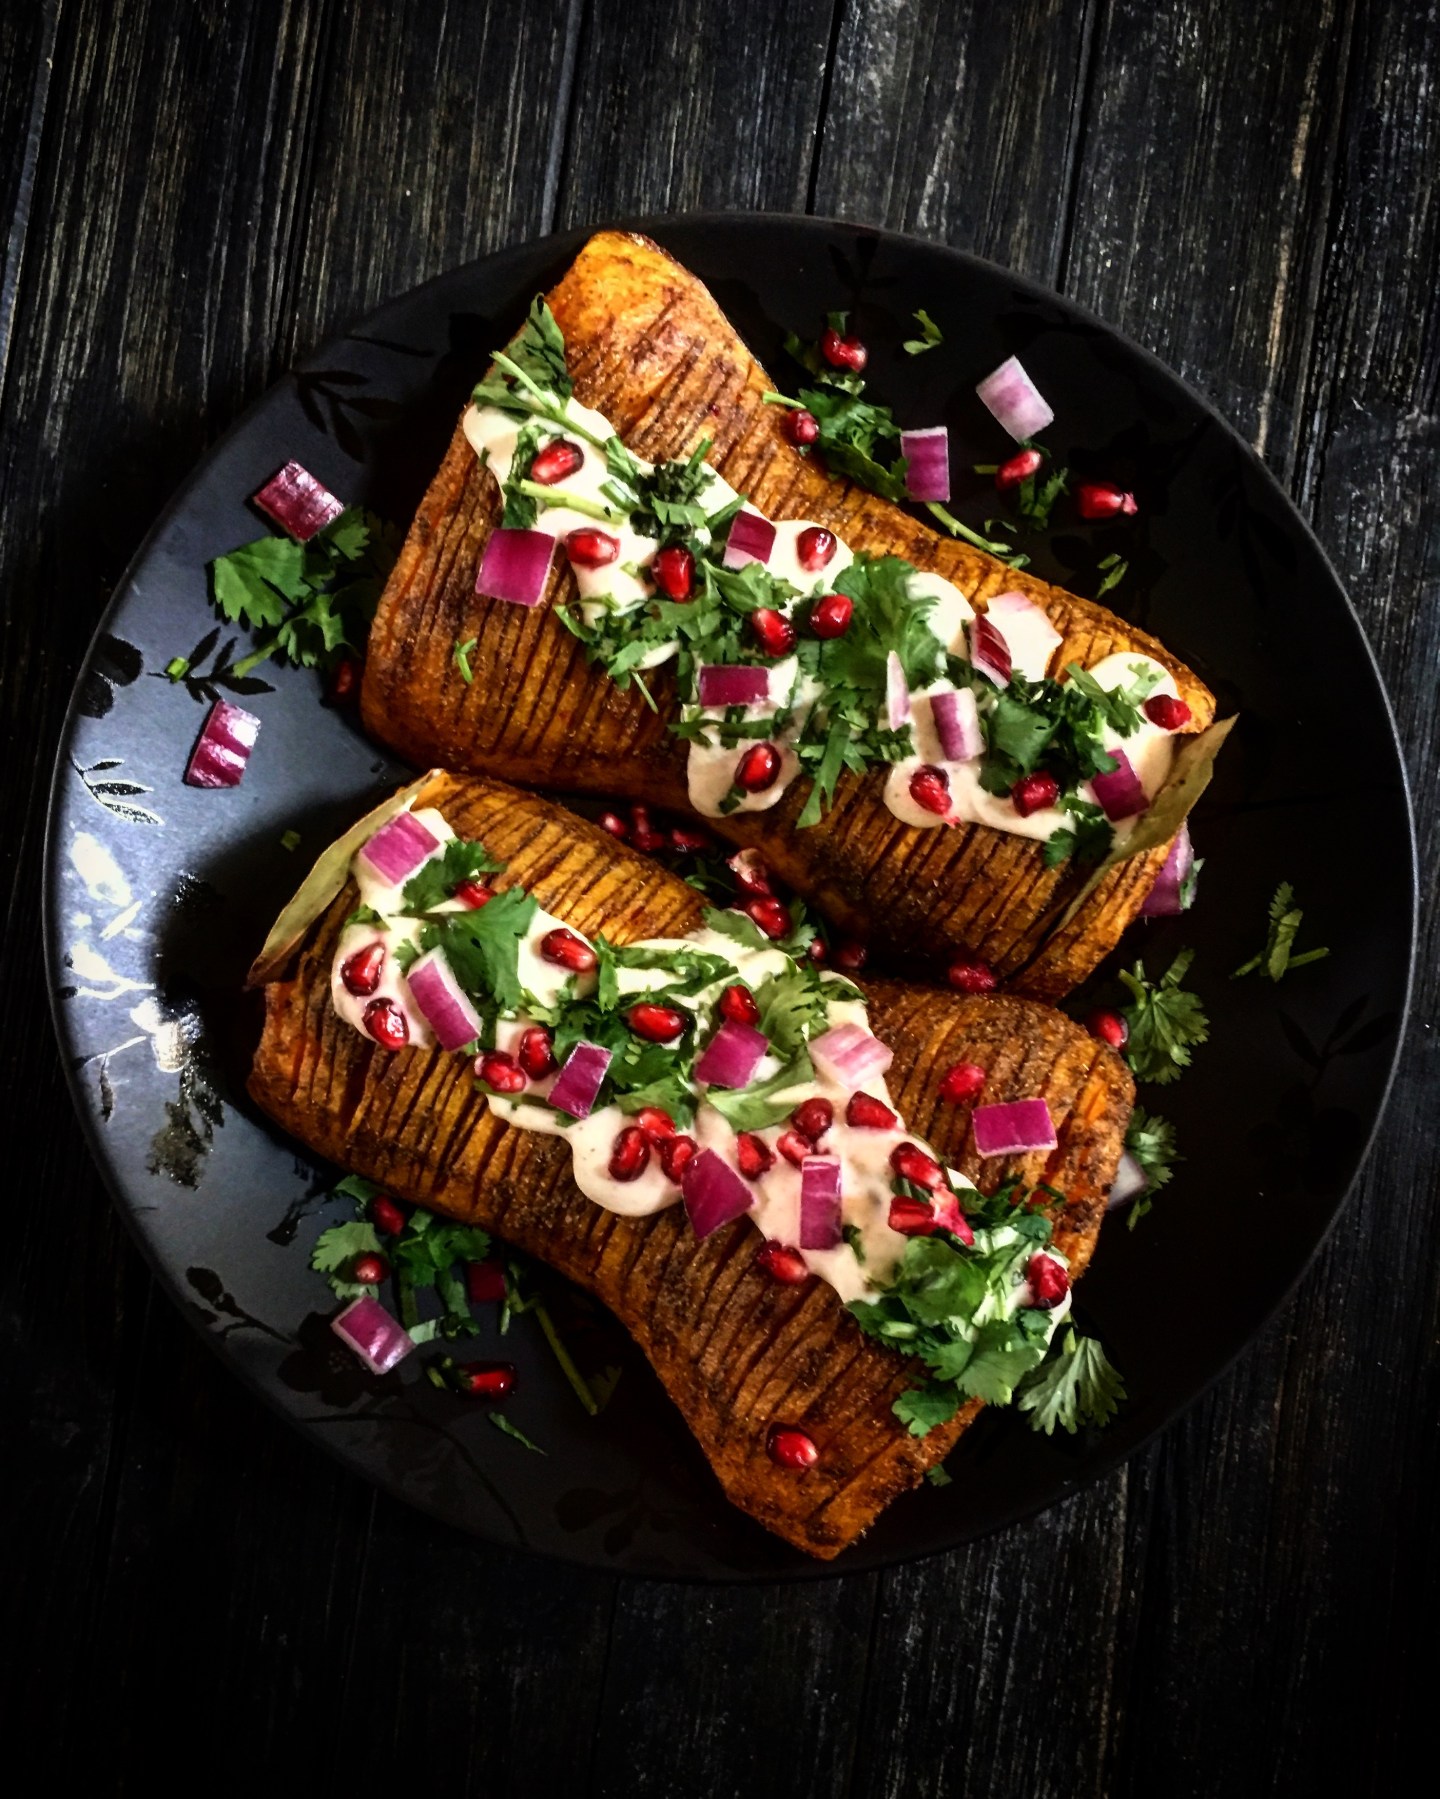 2 halves of a butternut squash is thinly incised and baked. They are topped with a white sauce, chopped purple onion, pomegranate seeds and parsley. 